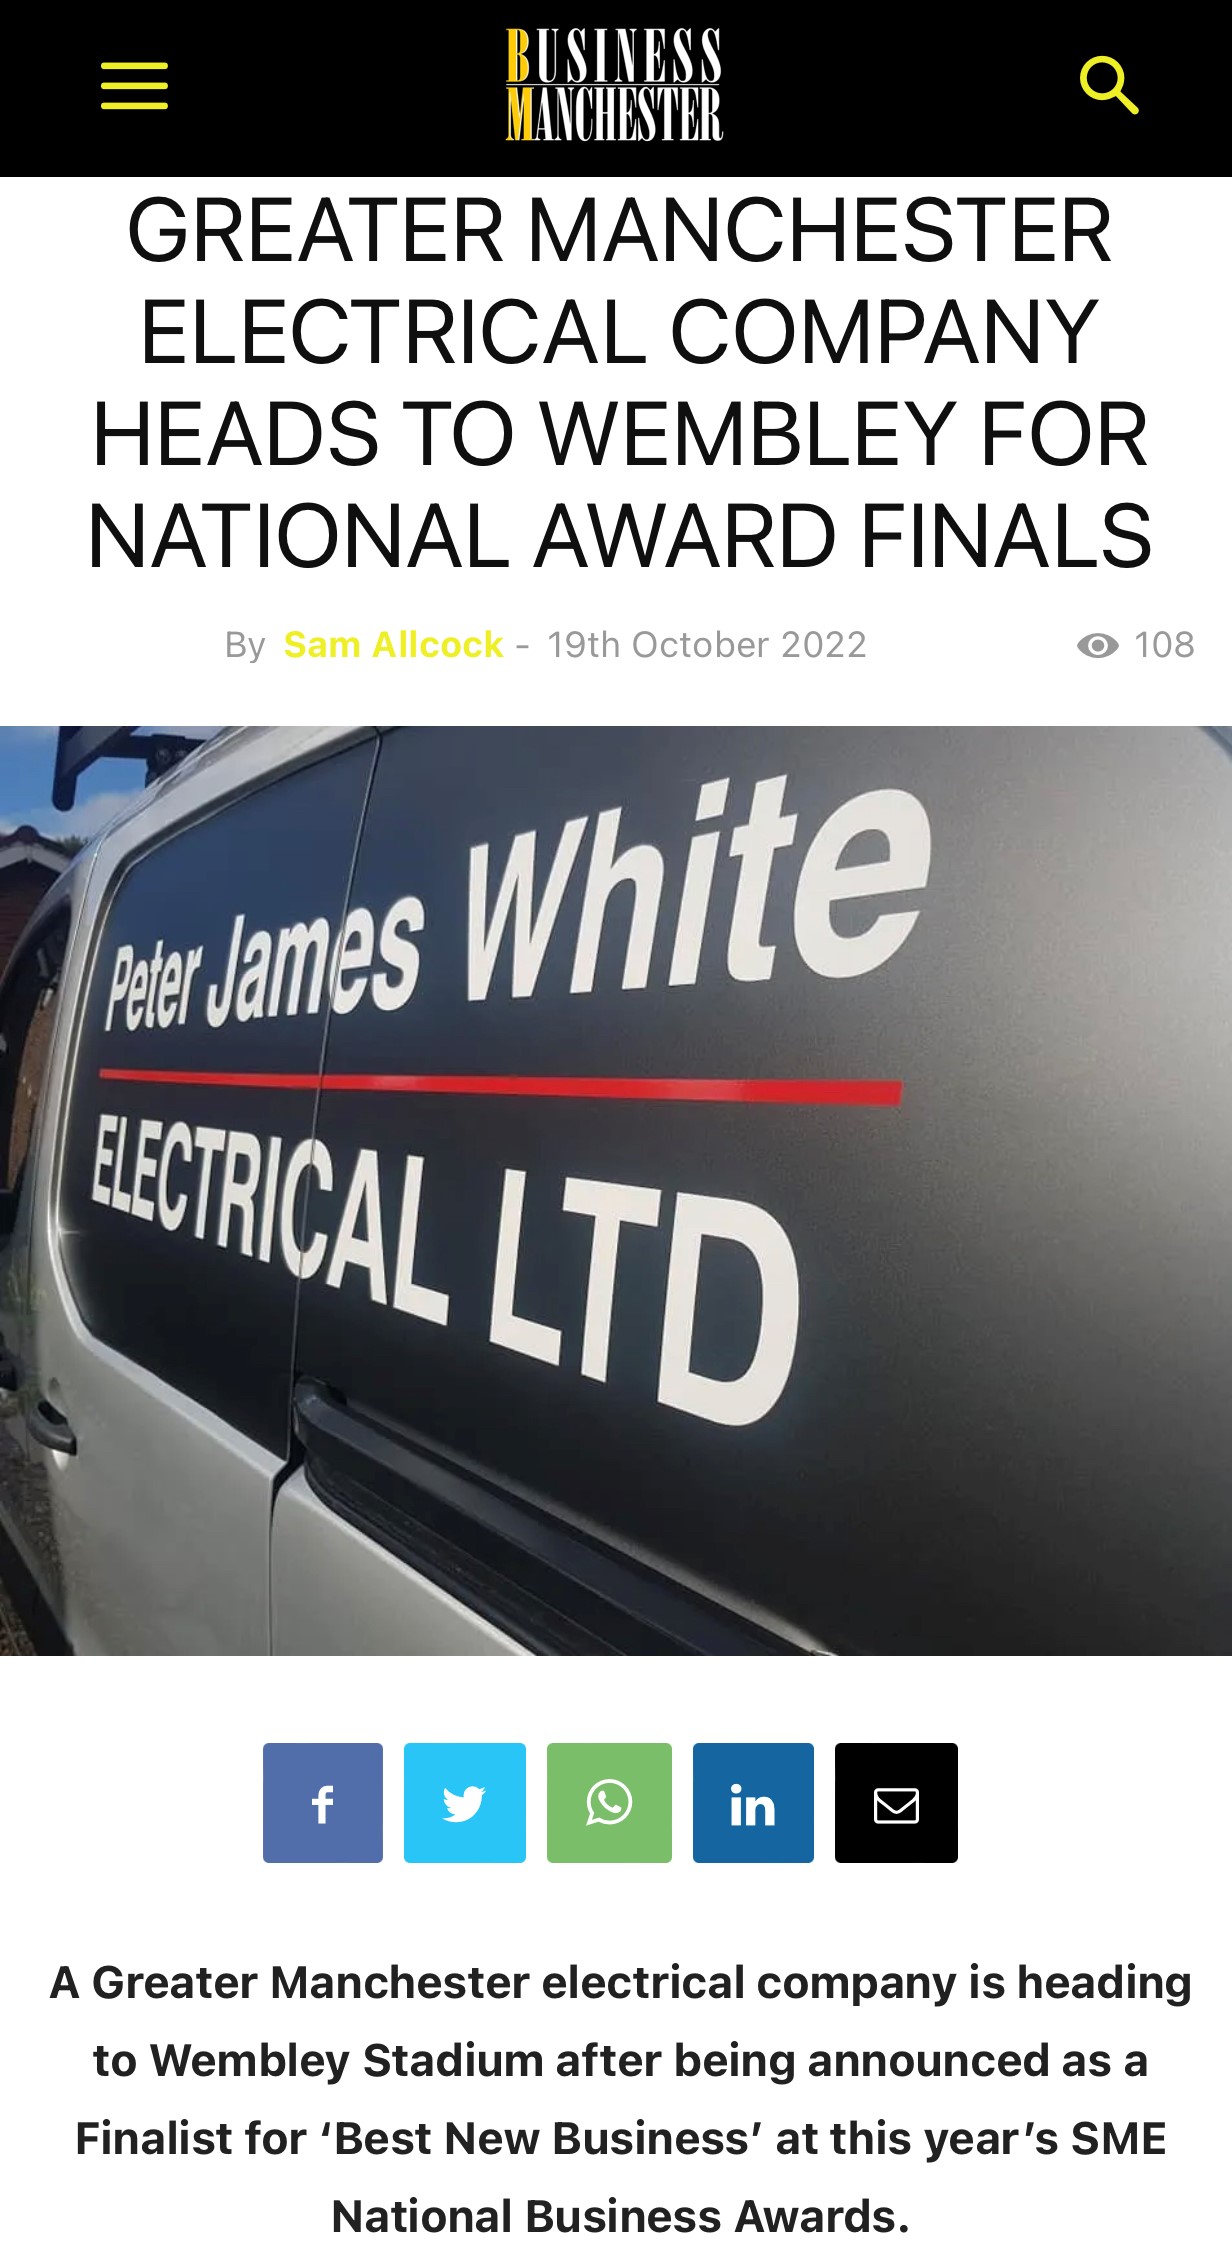 PRESS RELEASE (Business Manchester)  |  Greater Manchester Electrical Company Heads to Wembley for National Award Finals